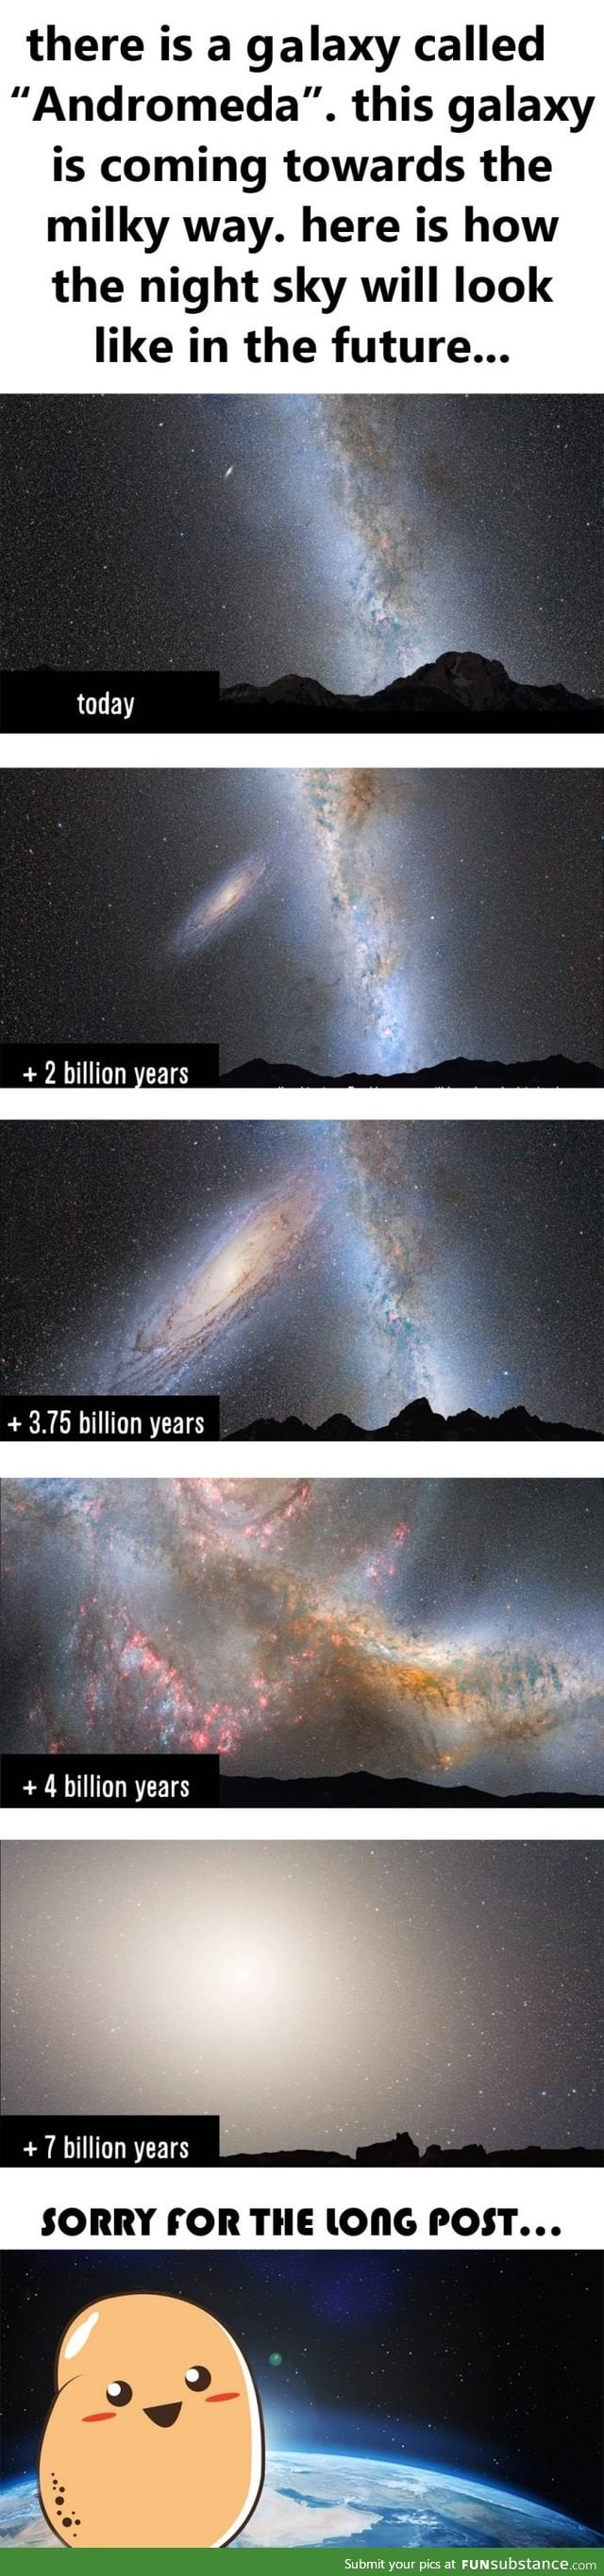 How the night sky from Earth will look like in the far future